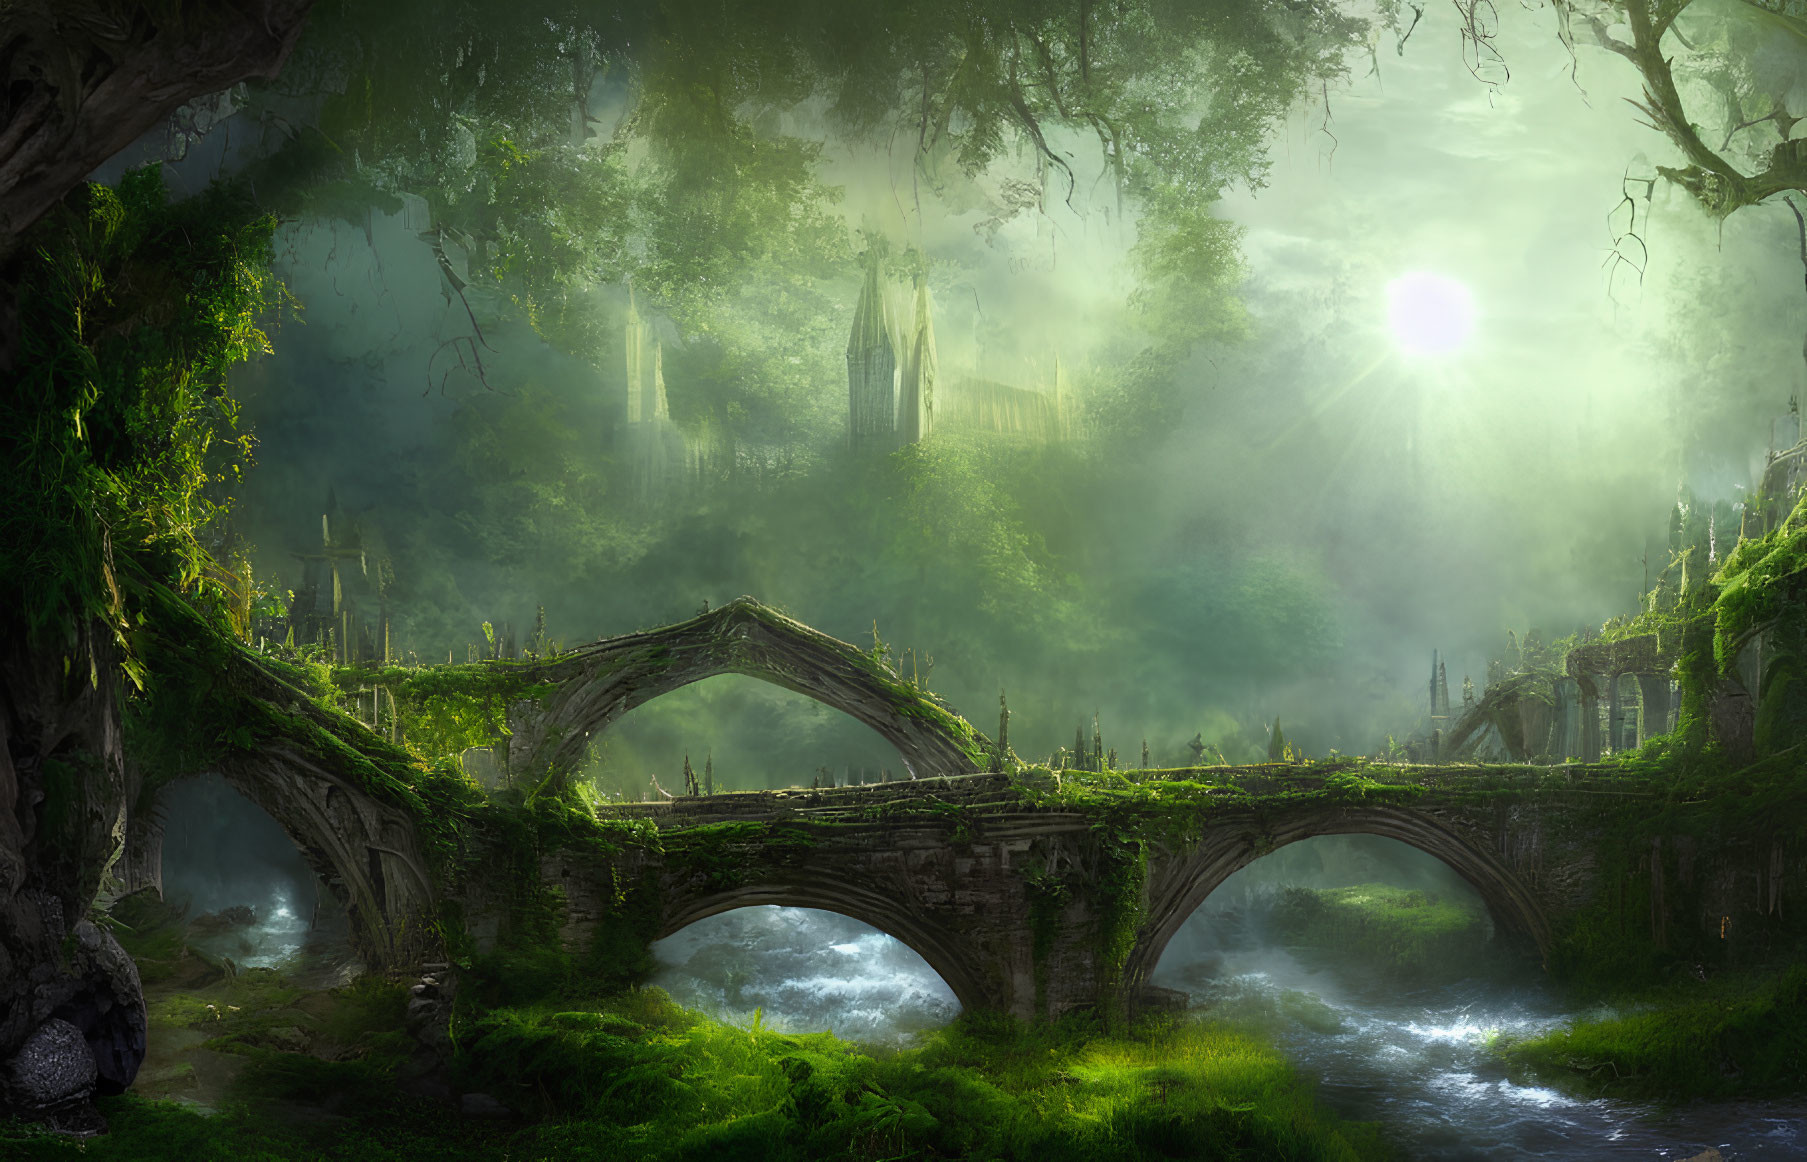 Ethereal forest scene with stone bridge, stream, and gothic castle